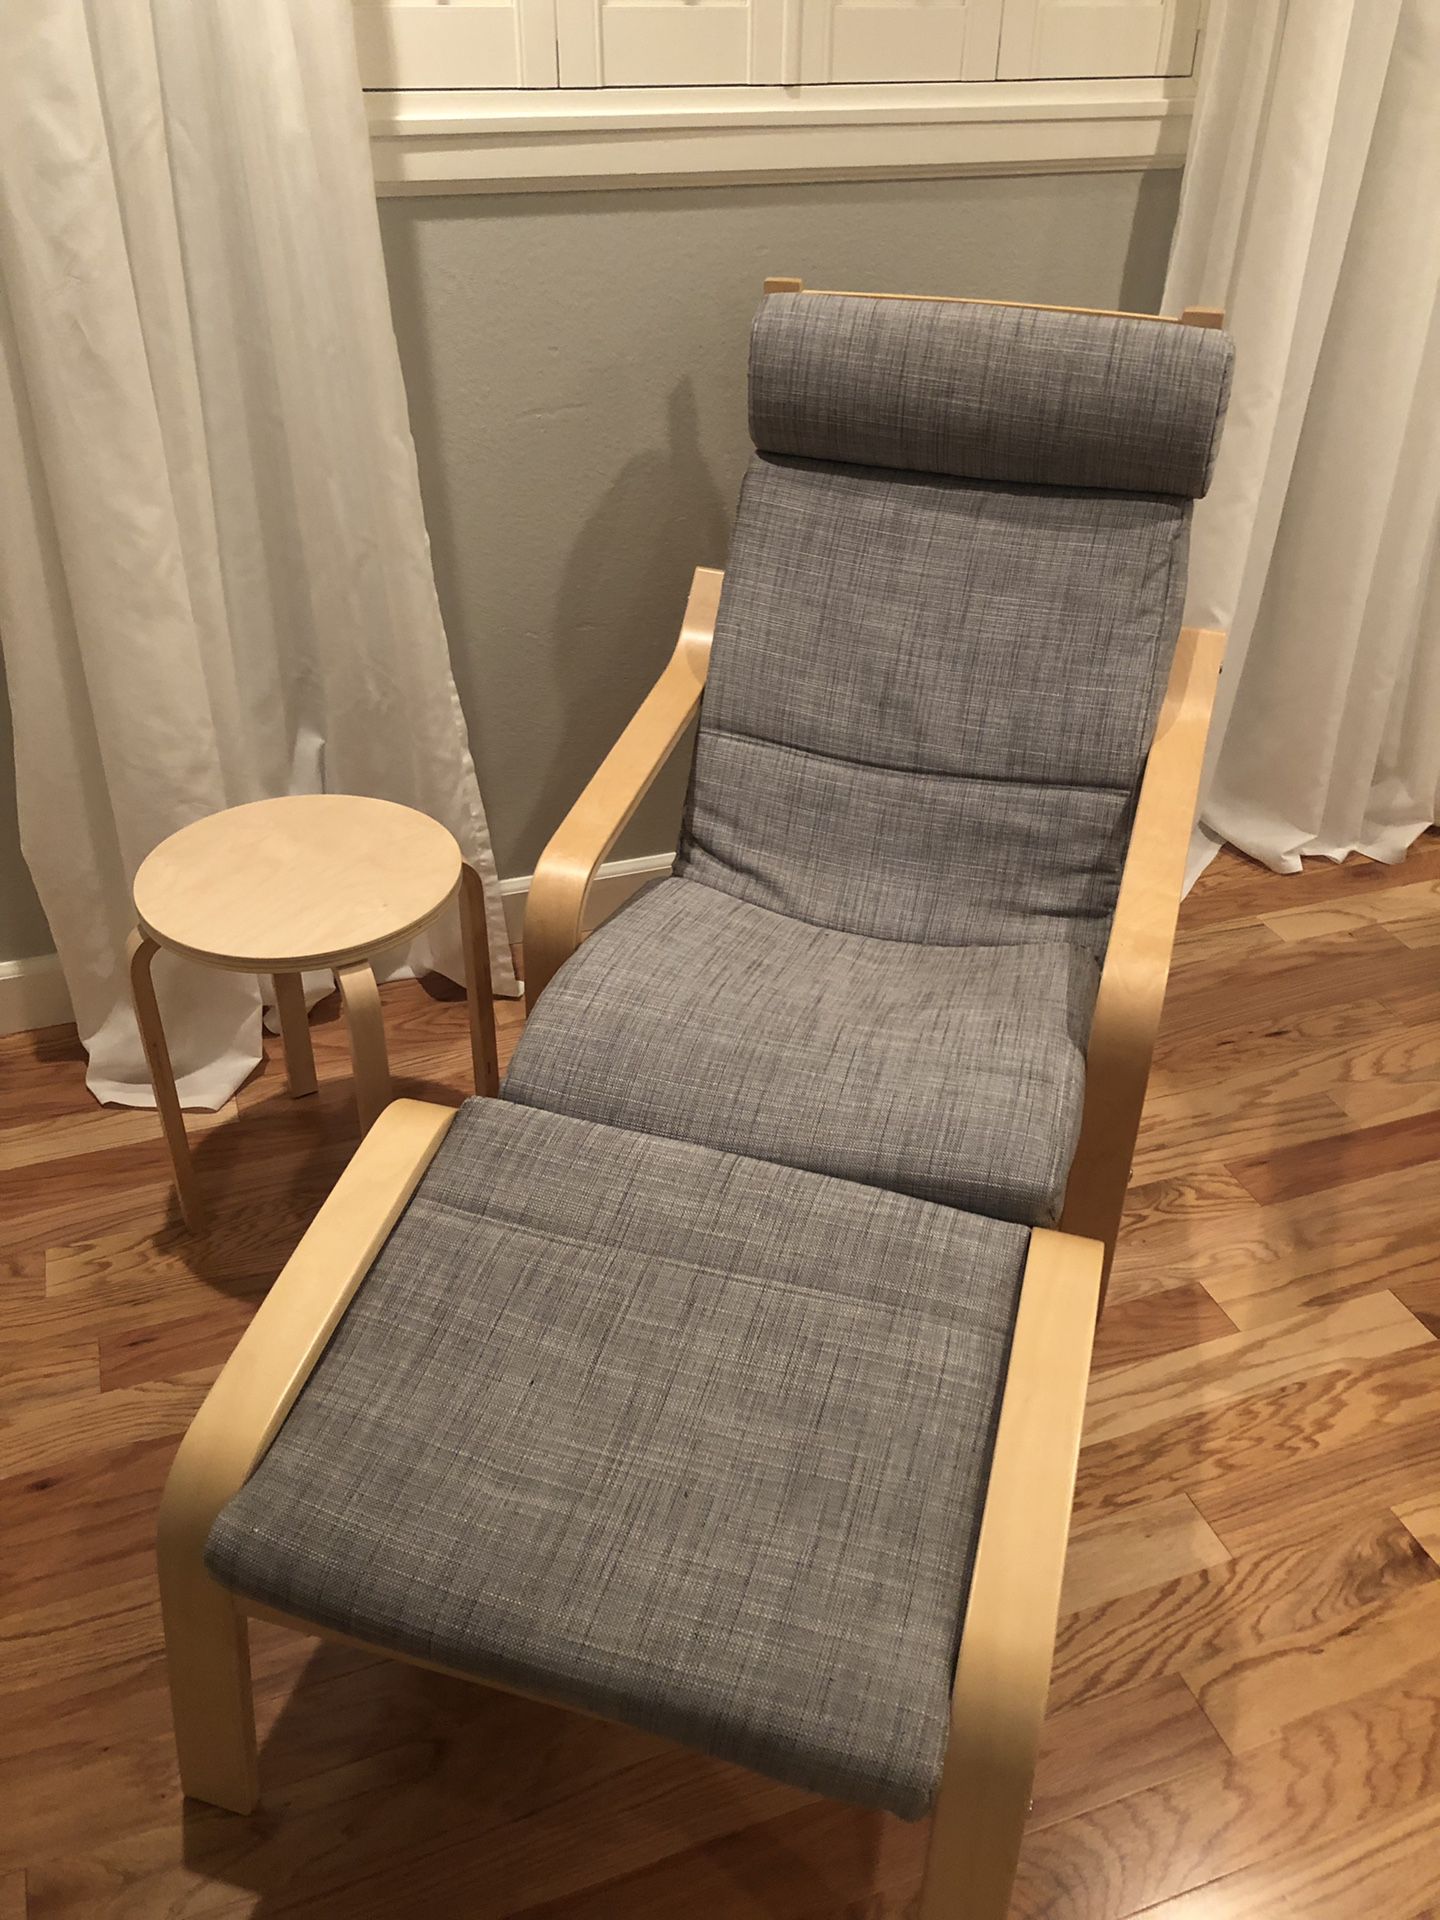 Ikea Poang Chair Armchair and Footstool Set with Covers Off-white -  furniture - by owner - sale - craigslist